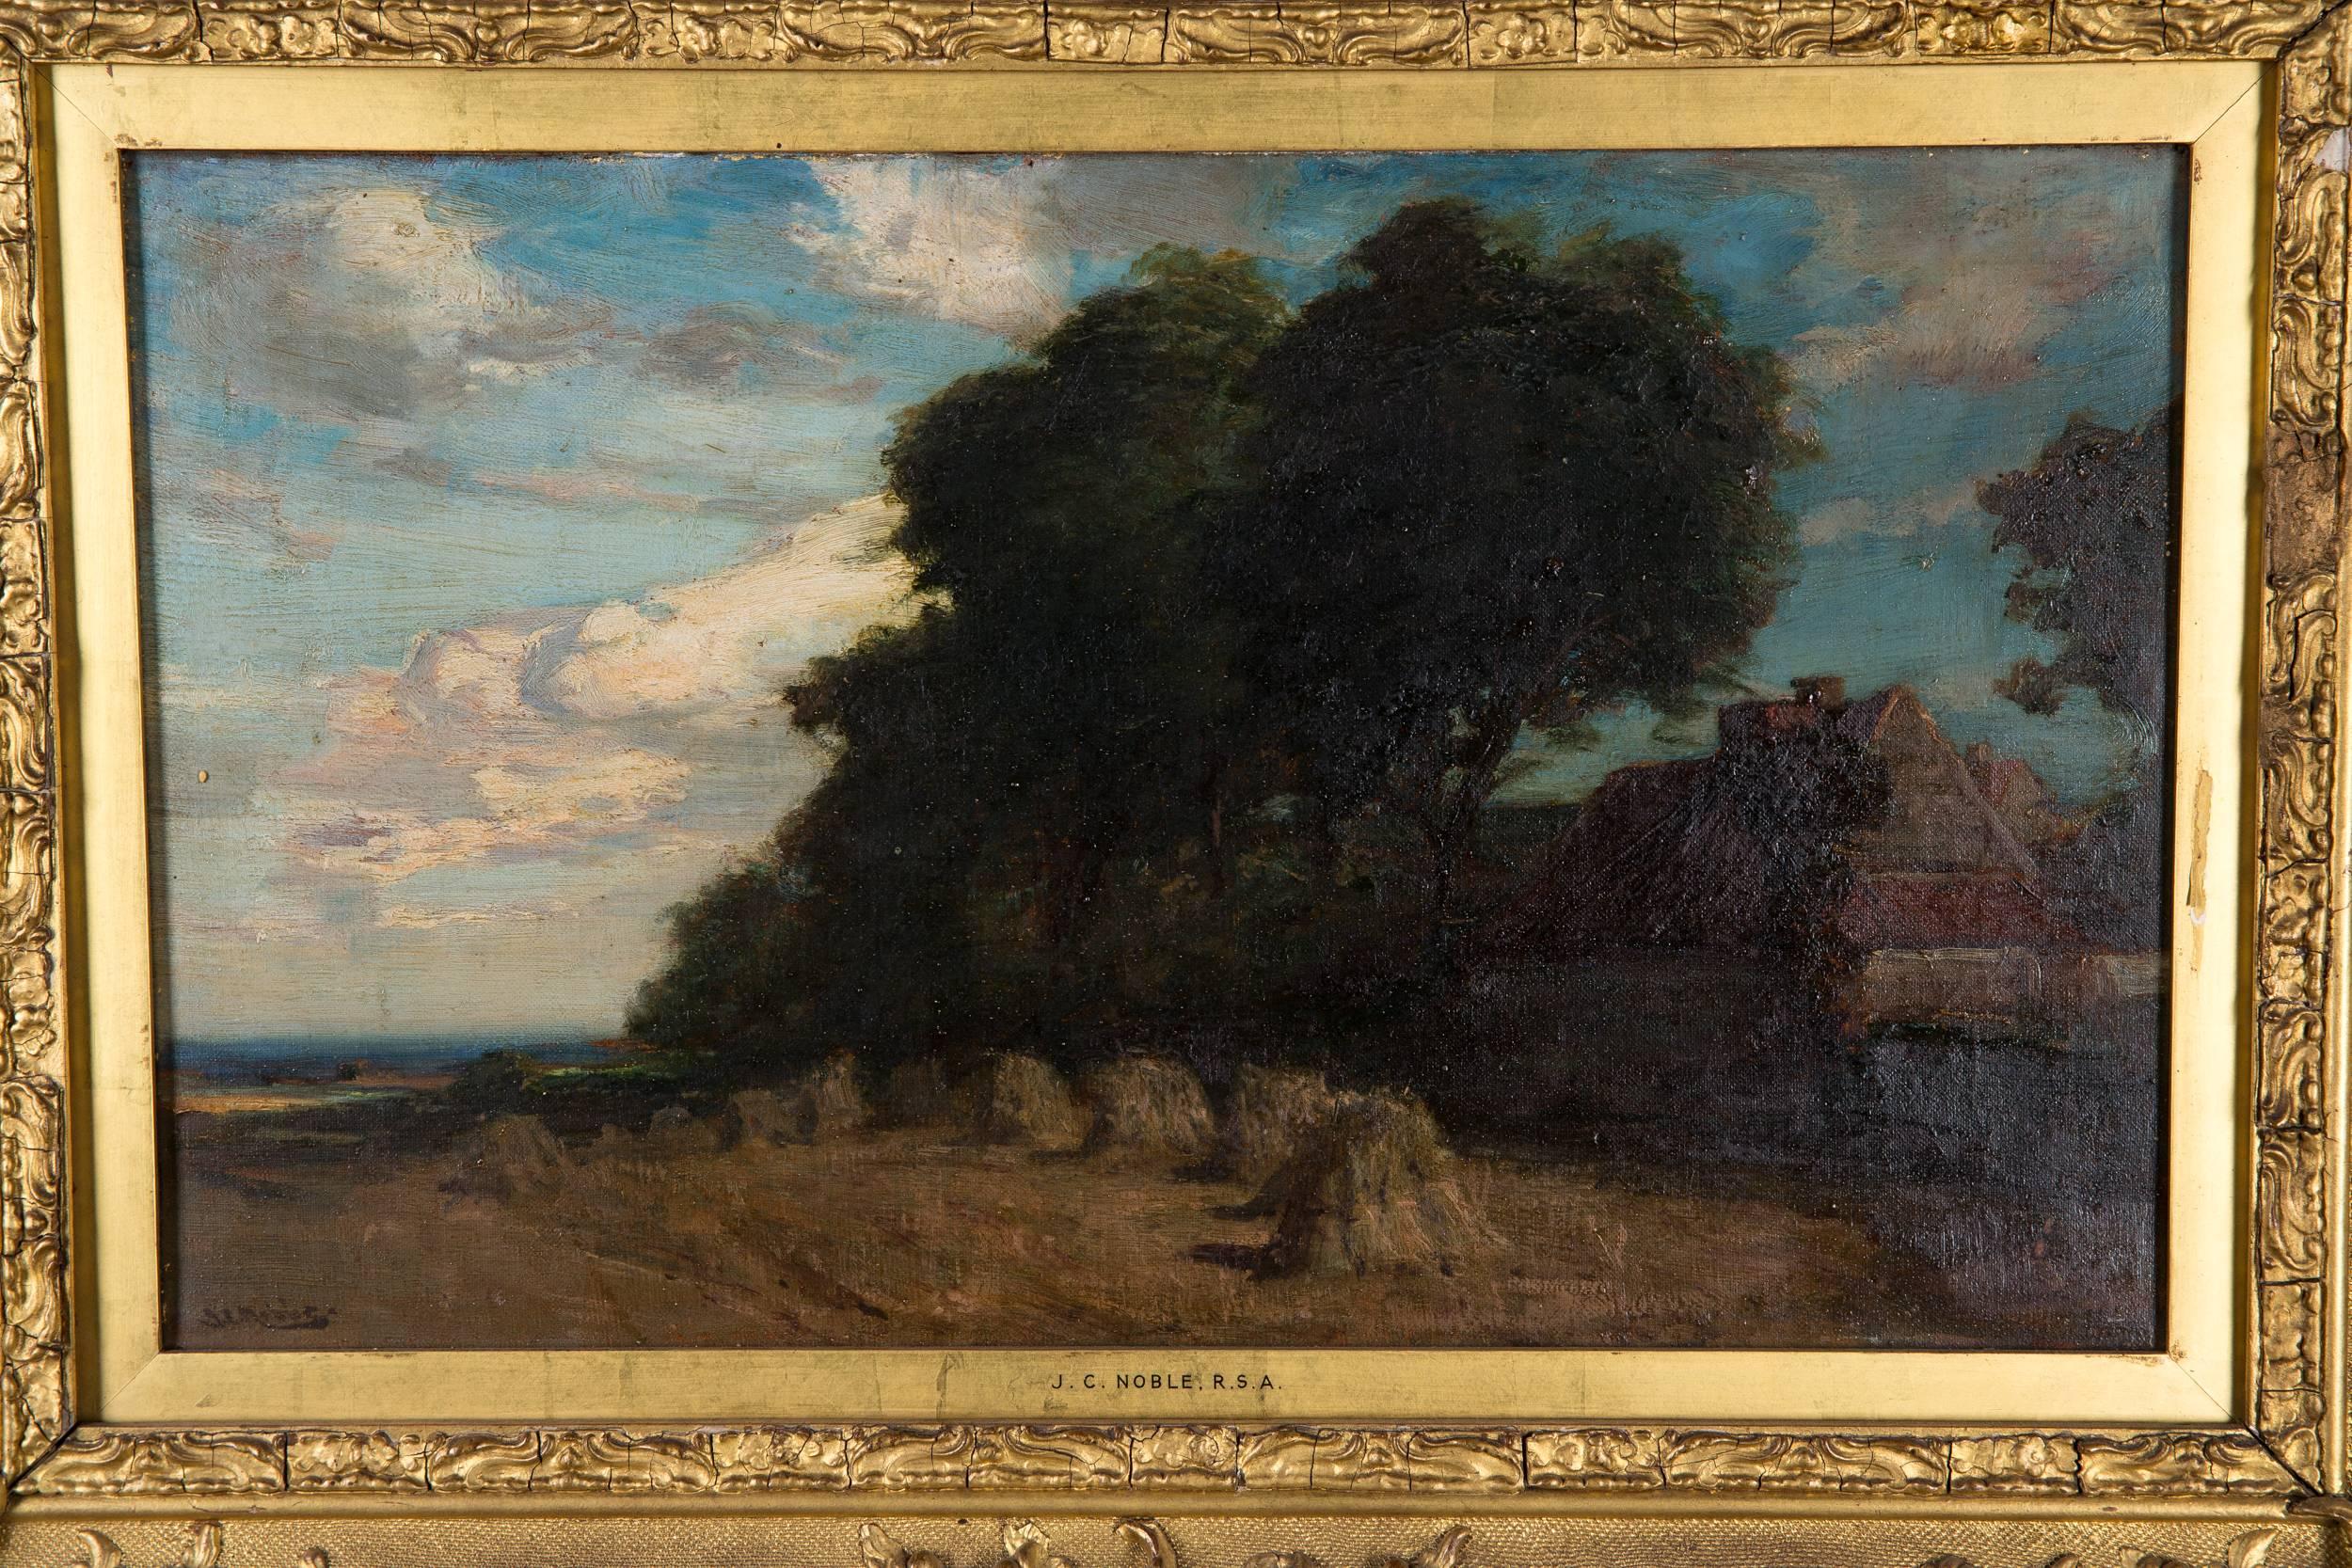 Oiled Original Oil Painting Landscape by James Campbell, 1846-1913